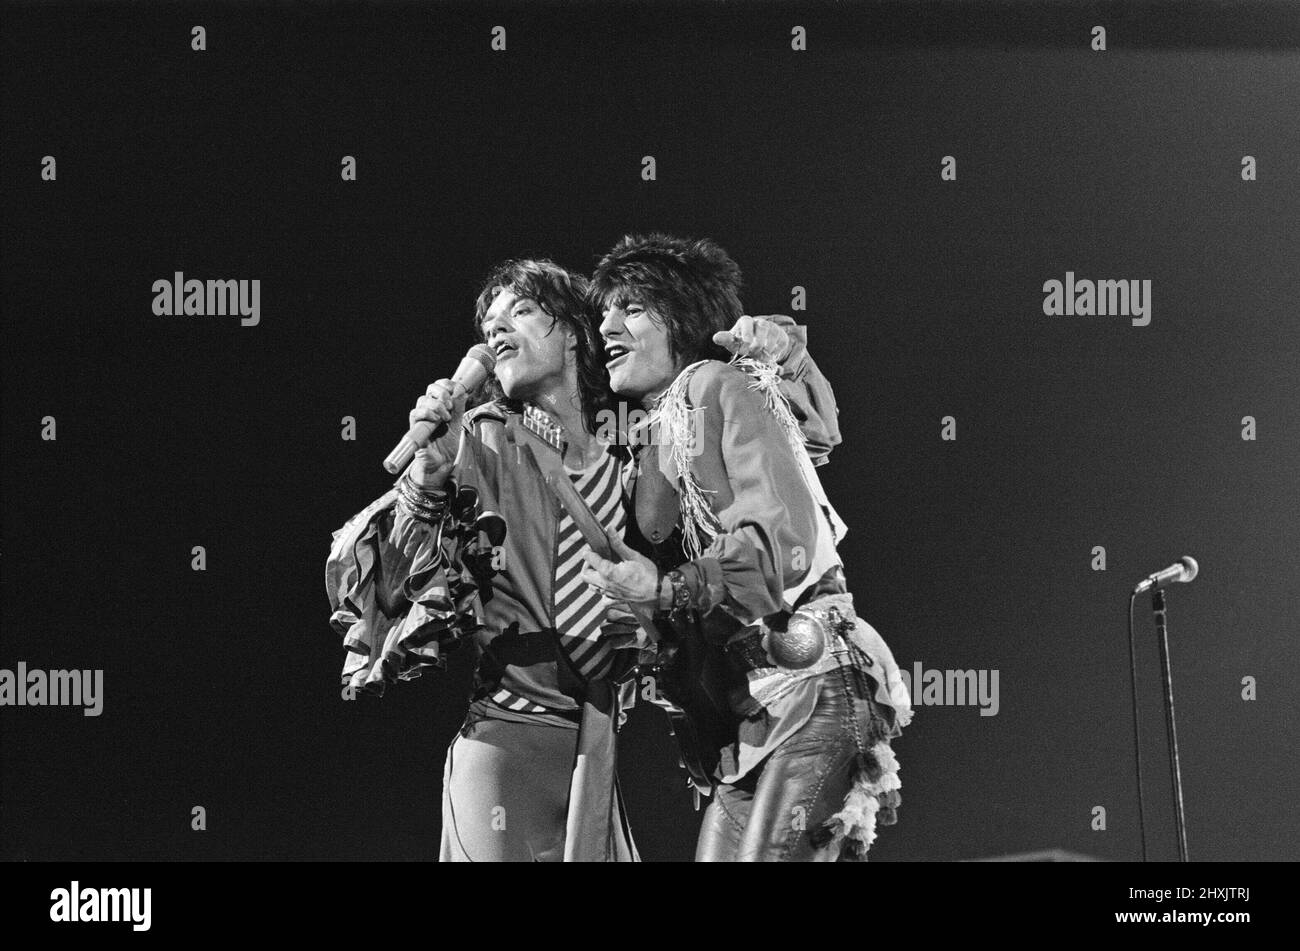 The Rolling Stones - live at Earl's Court, West London. Picture shows Mick Jagger and Ronnie Wood together onstage.  This concert was part of the 1976 European Tour. It started in Frankfurt Germany on 28th April and ended at Knebworth in England on 21st August 1976.  Whilst we cannot confirm the actual set list for this show, a typical set list for this tour was...  'Honky Tonk Women' 'If You Can't Rock Me'/'Get off of My Cloud' 'Hand of Fate' 'Hey Negrita' 'Ain't Too Proud to Beg' 'Fool to Cry' 'Hot Stuff' 'Star Star' 'Angie' - [played some shows] 'You Gotta Move' 'You Can't Always Get What Y Stock Photo